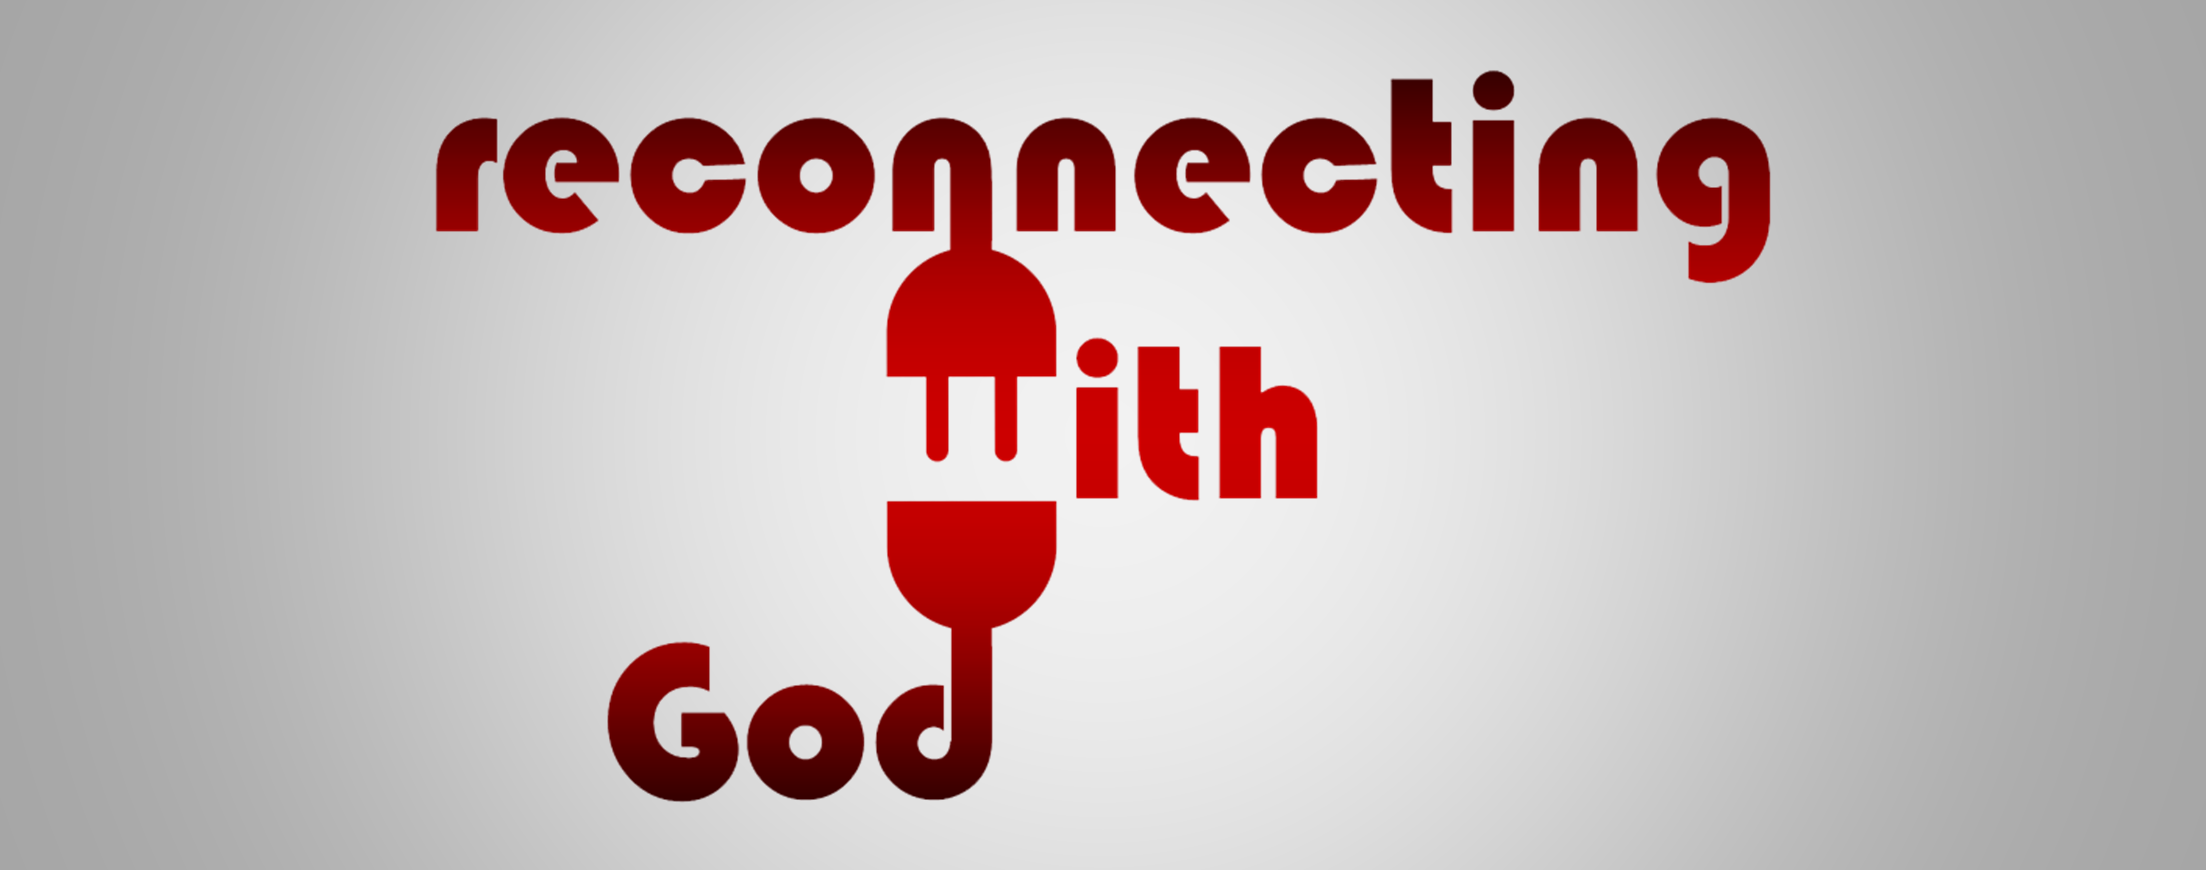 Reconnecting With God – LifePoint Assembly of God